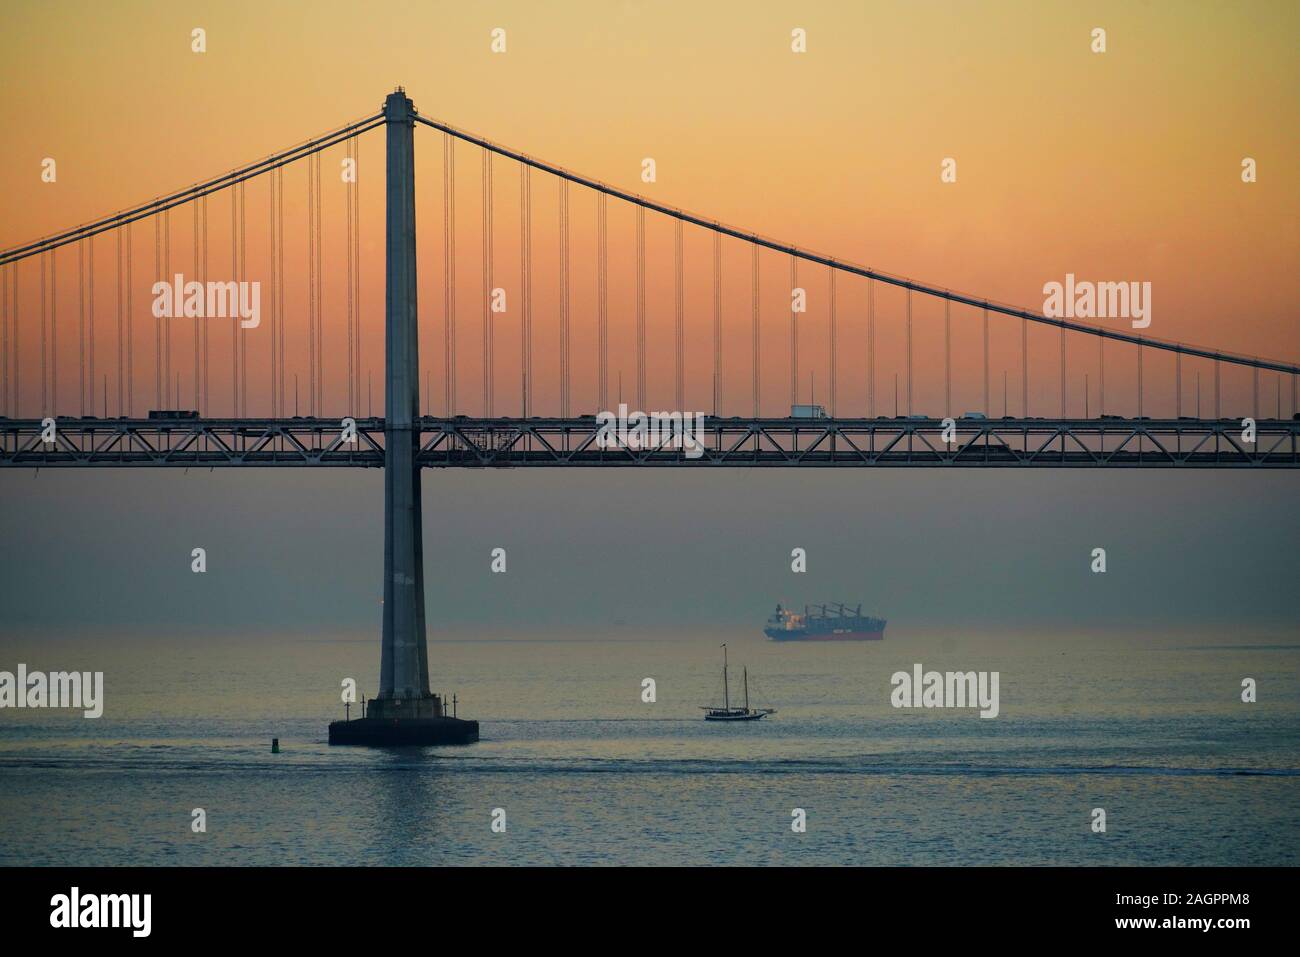 San Francisco Bay Bridge at dusk with schooner and freighter in bay. Stock Photo